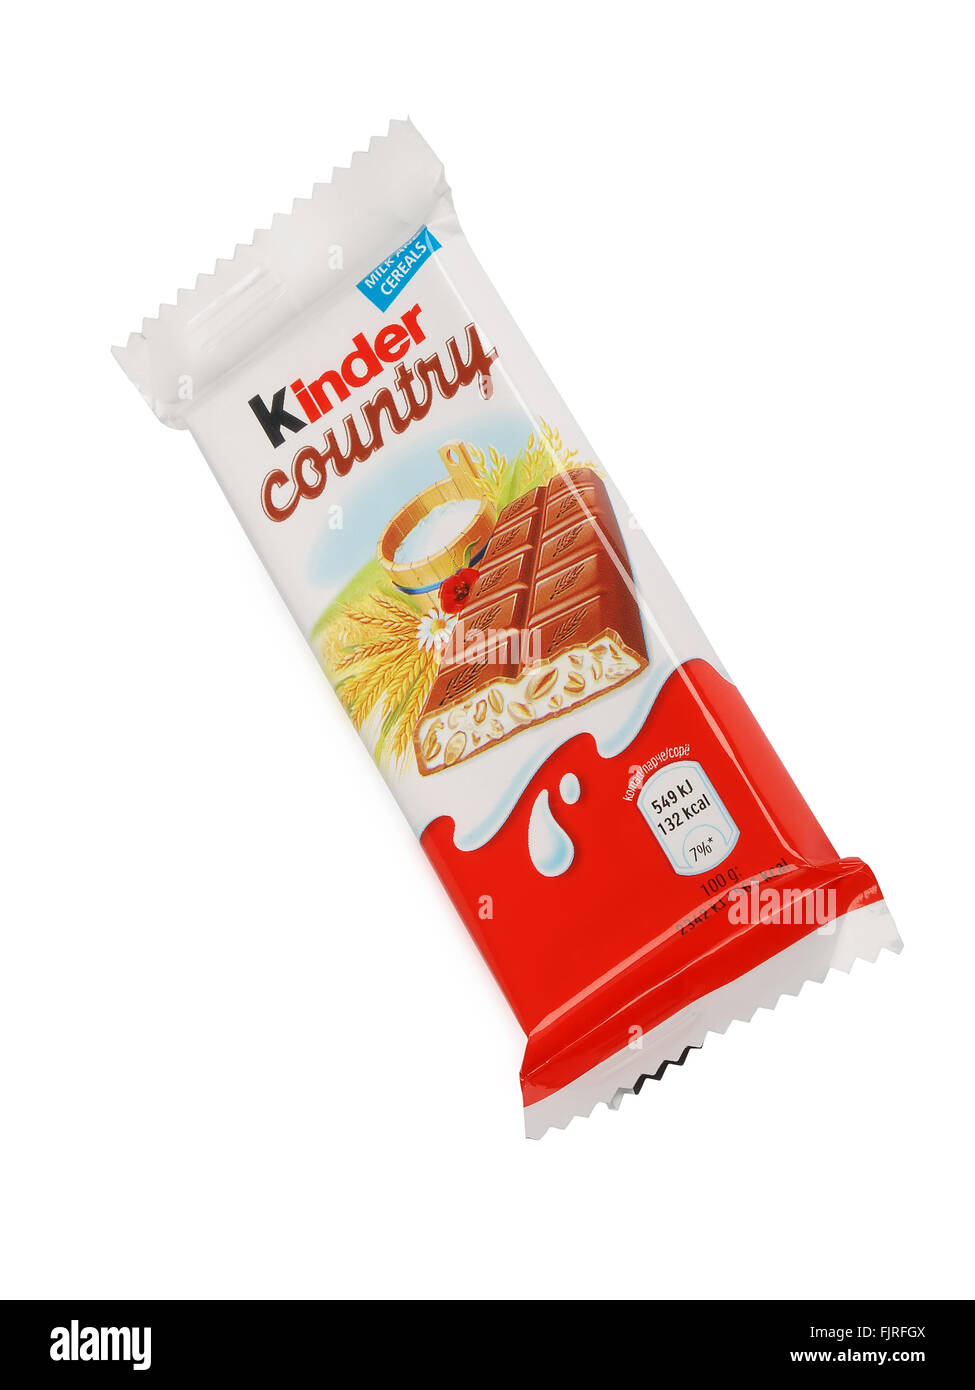 Kinder Country chocolate bar isolated on white background. Kinder Country bars are produced by Ferrero. Stock Photo